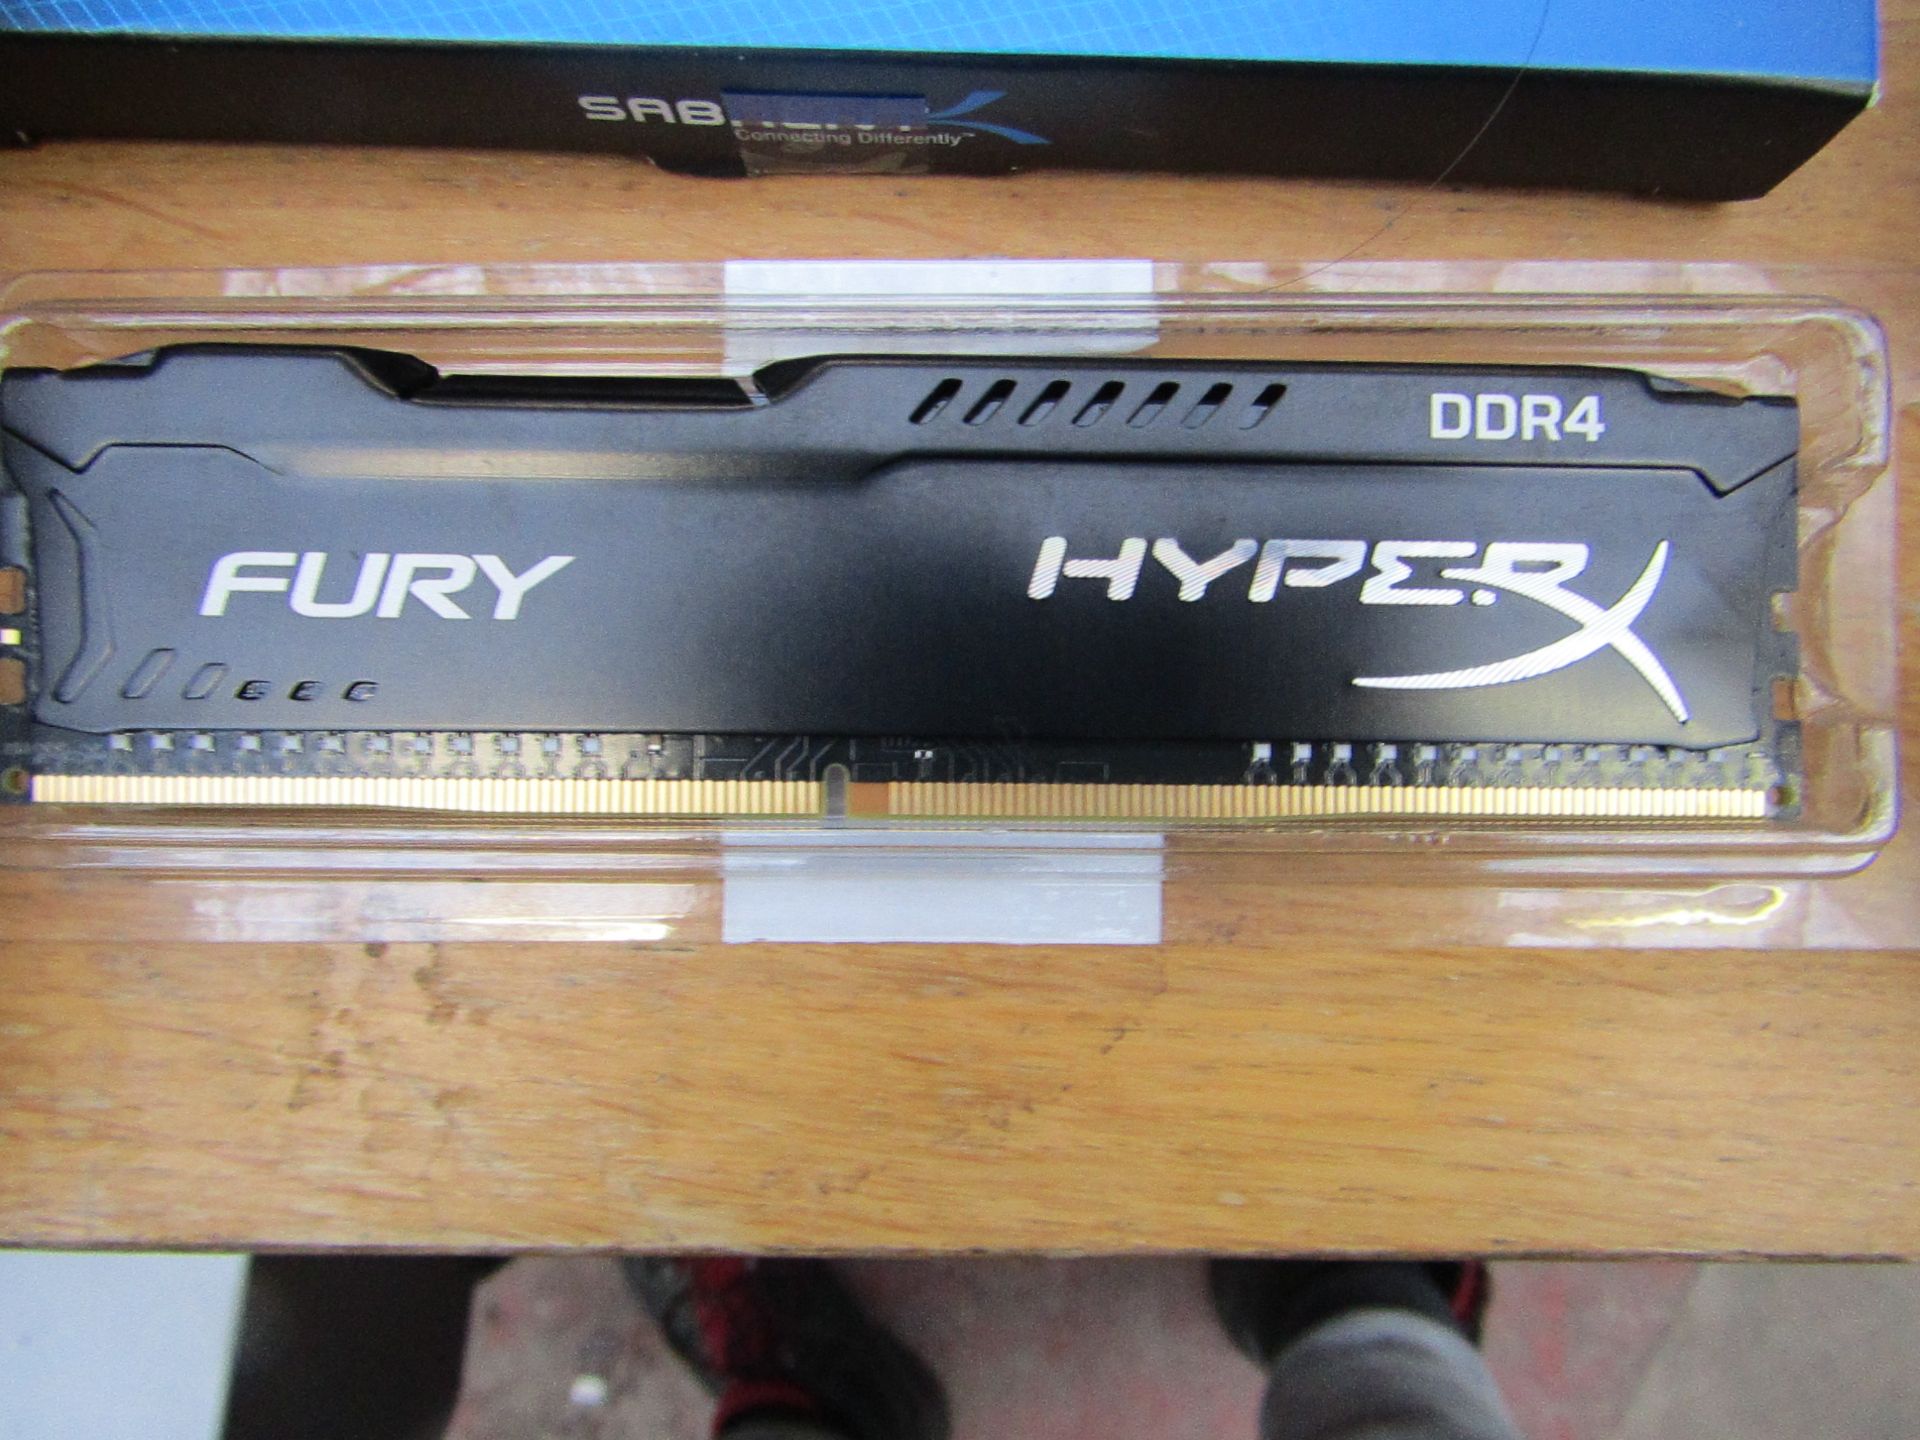 HyperX - FuryDDR4 - untested and packaged.